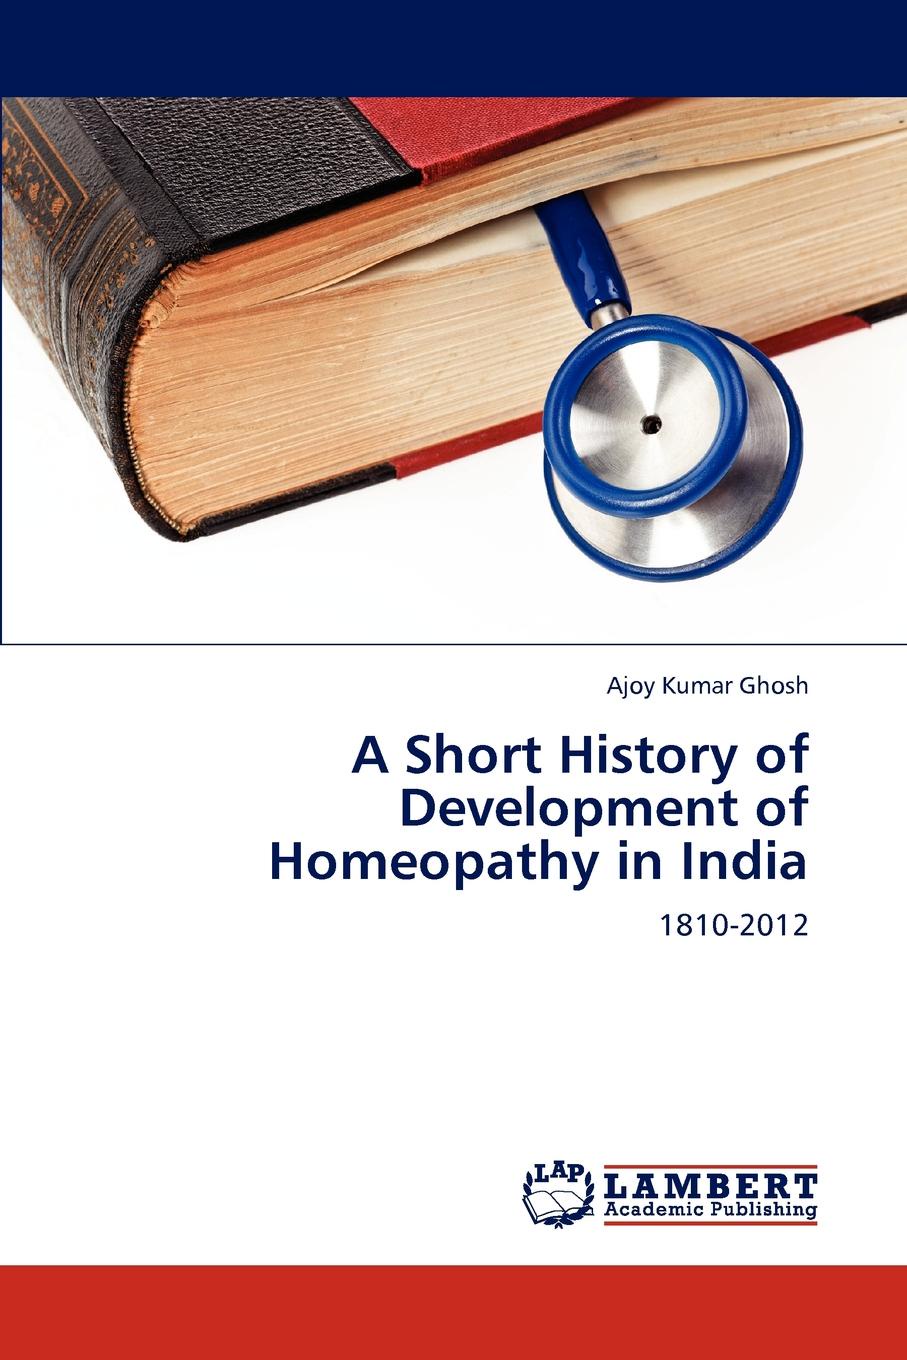 Ajoy Kumar Ghosh A Short History of Development of Homeopathy in India